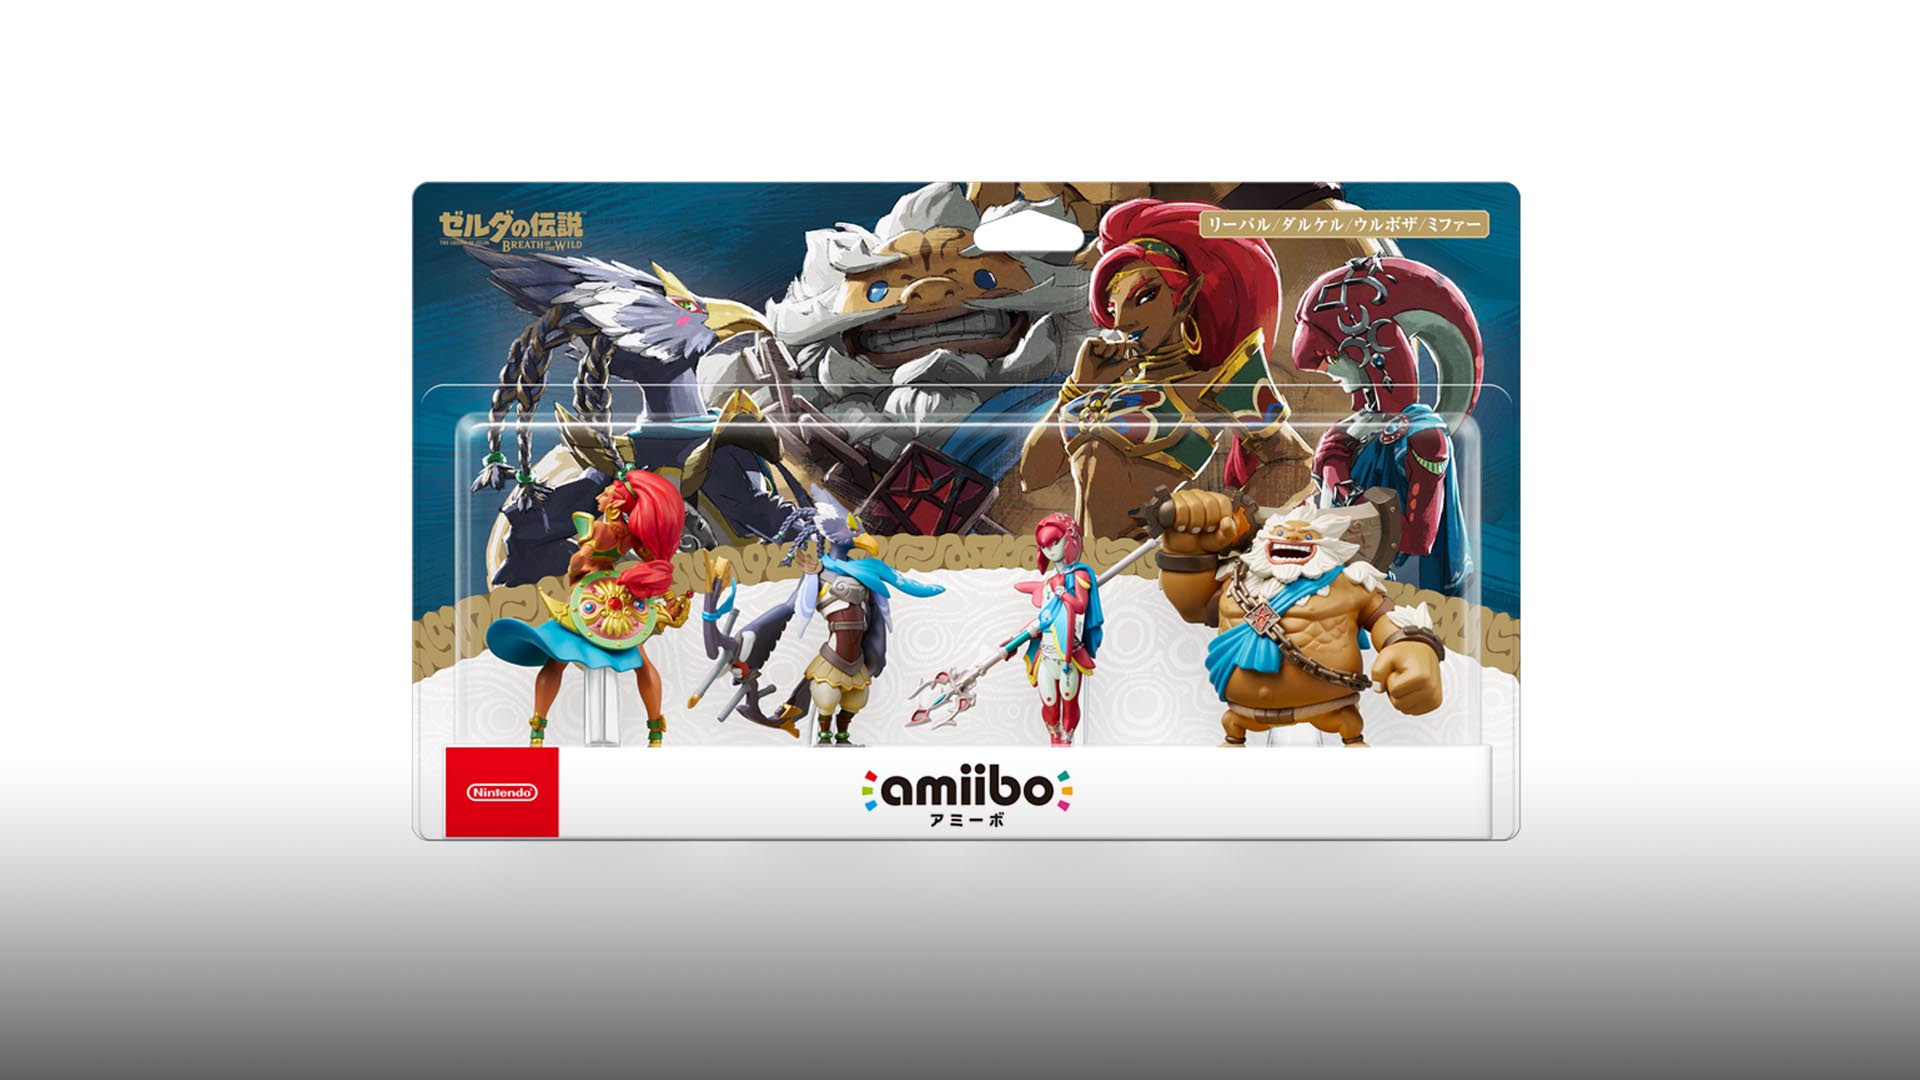 (Video) Zelda: Breath of the Wild Champions amiibo 4-Pack unboxing ...